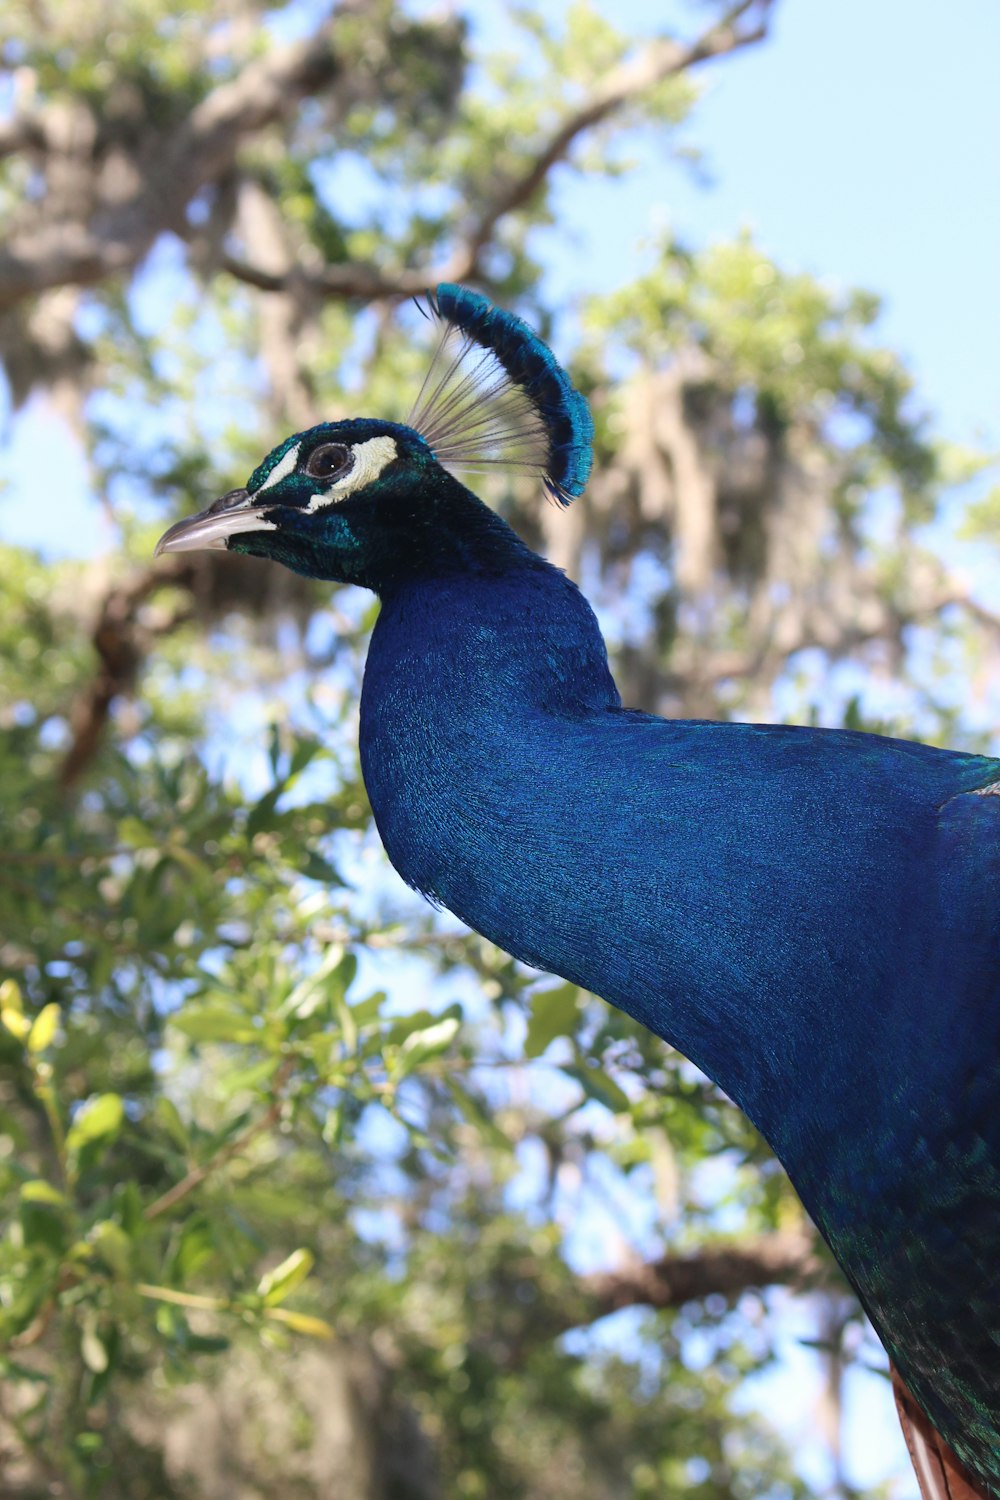 a peacock standing on top of a tree branch